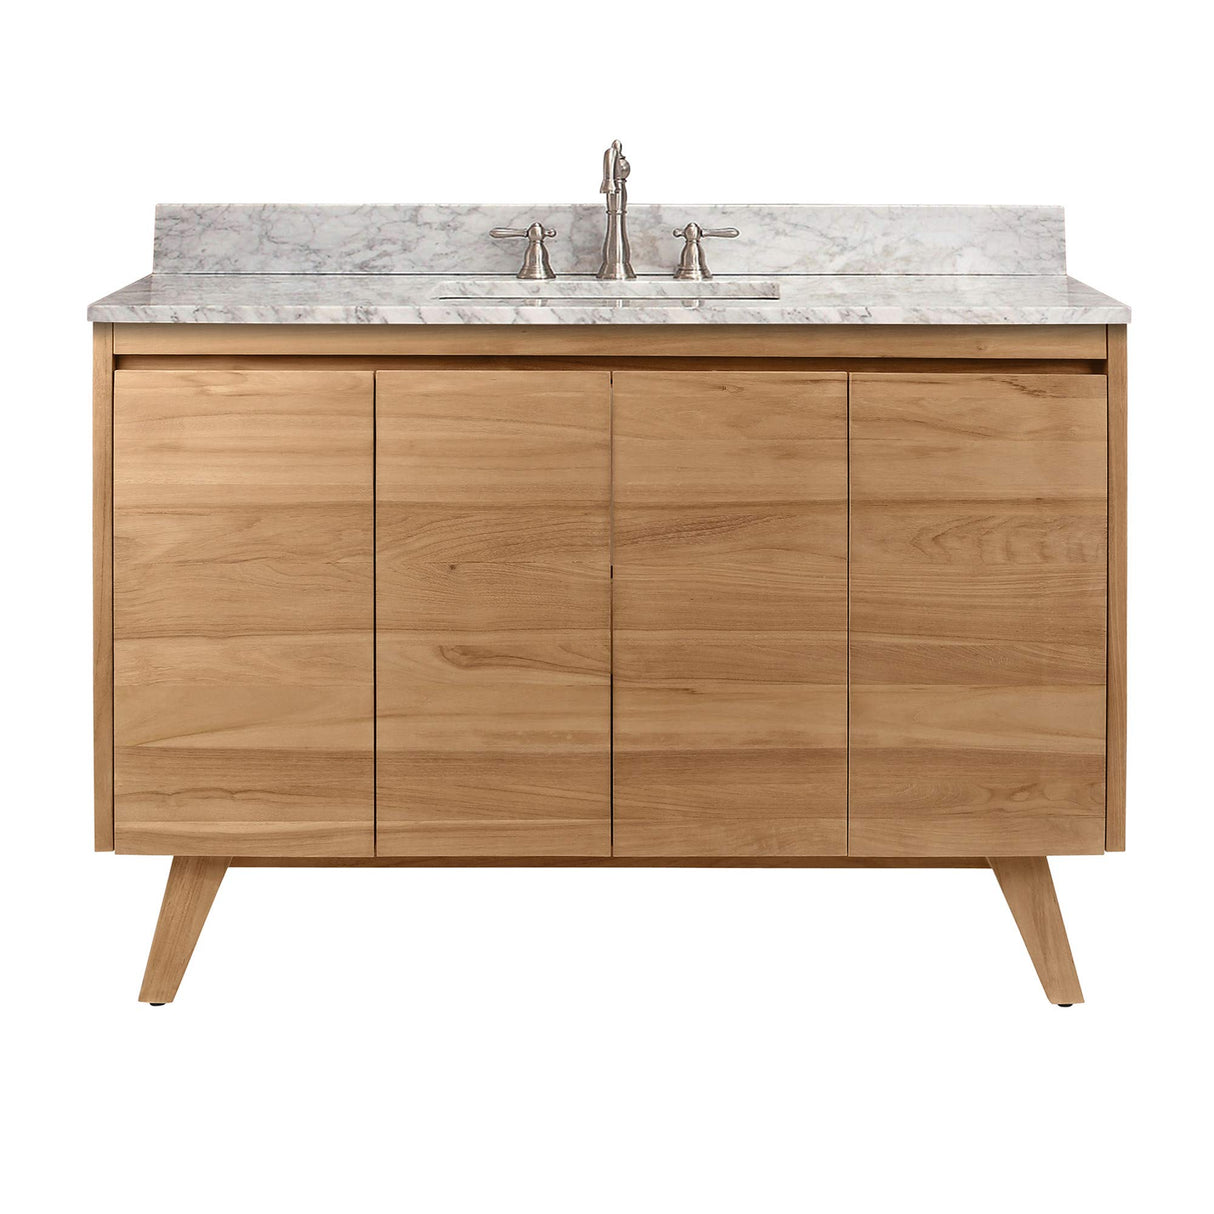 Avanity Coventry 49 in. Vanity Combo in Natural Teak with Carrara White Marble Top